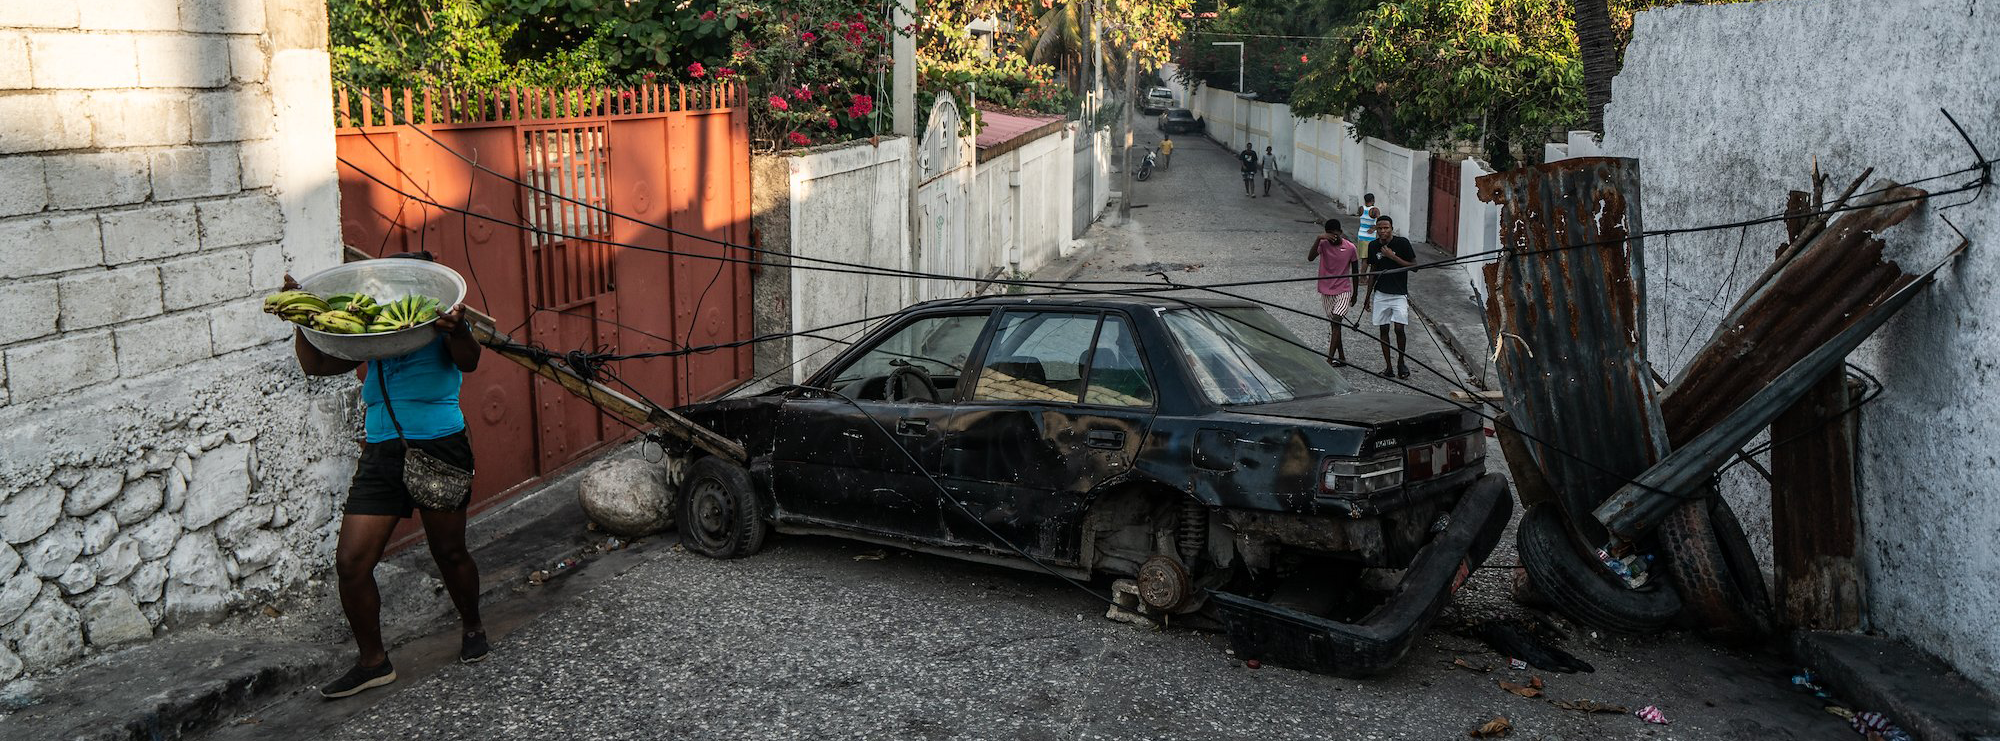 view of a street where a few pedestrian walk around a burnt car and some tires